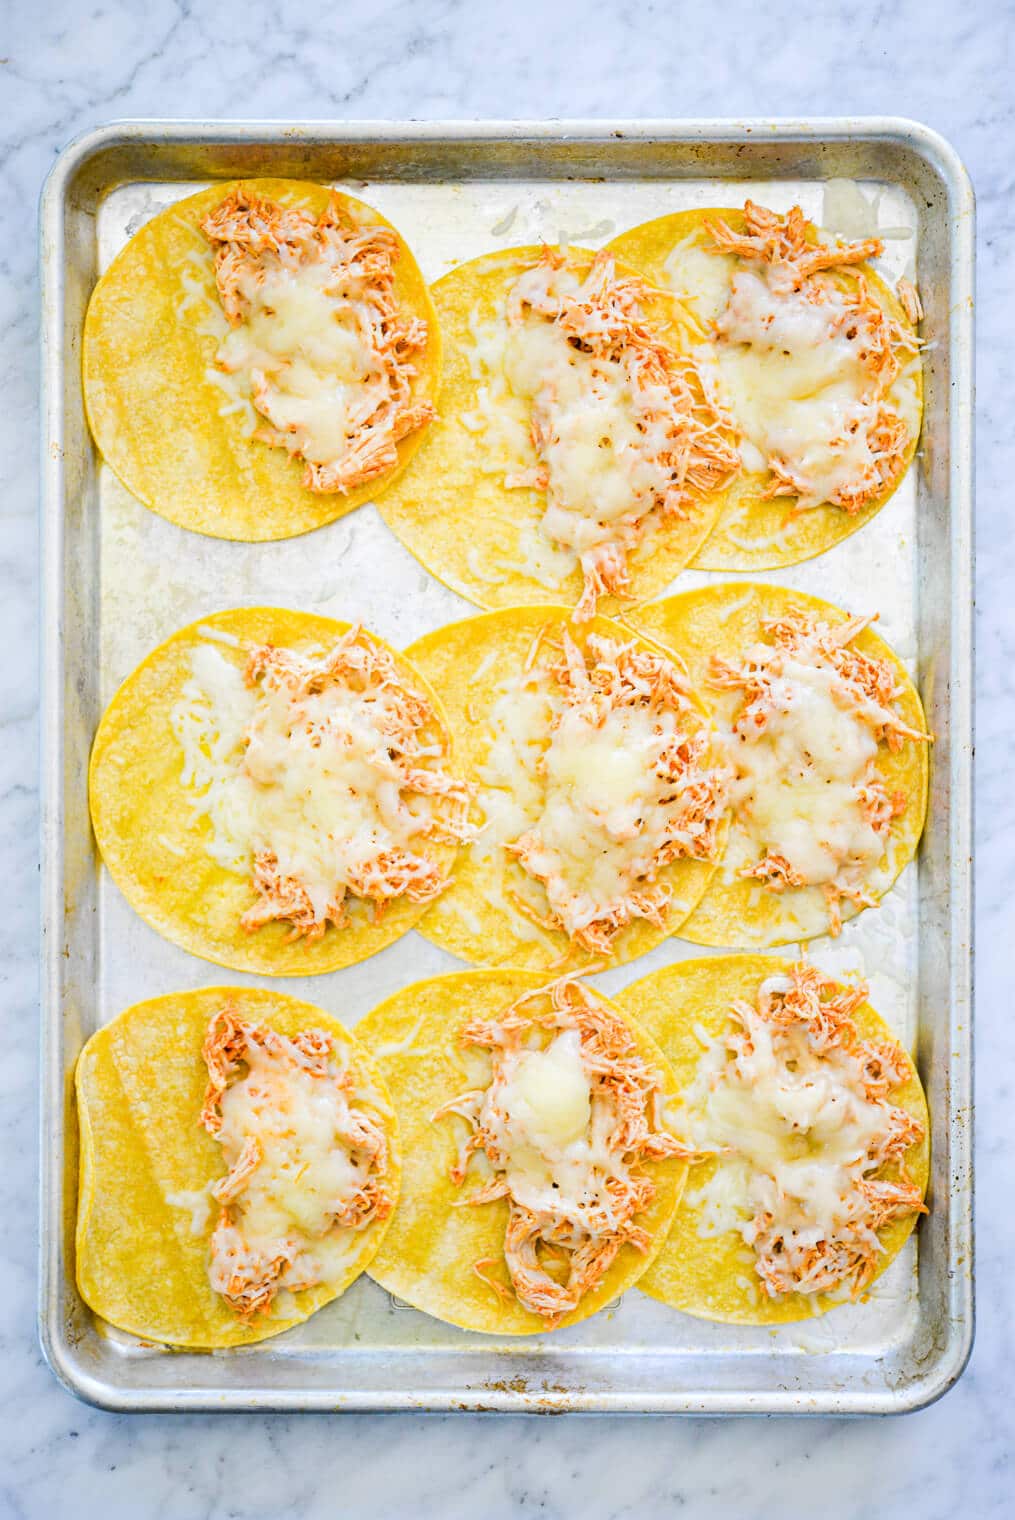 Sheet pan with three rows of three corn tortillas. Each tortilla is topped on one half side with shredded chicken and melted shredded cheese.